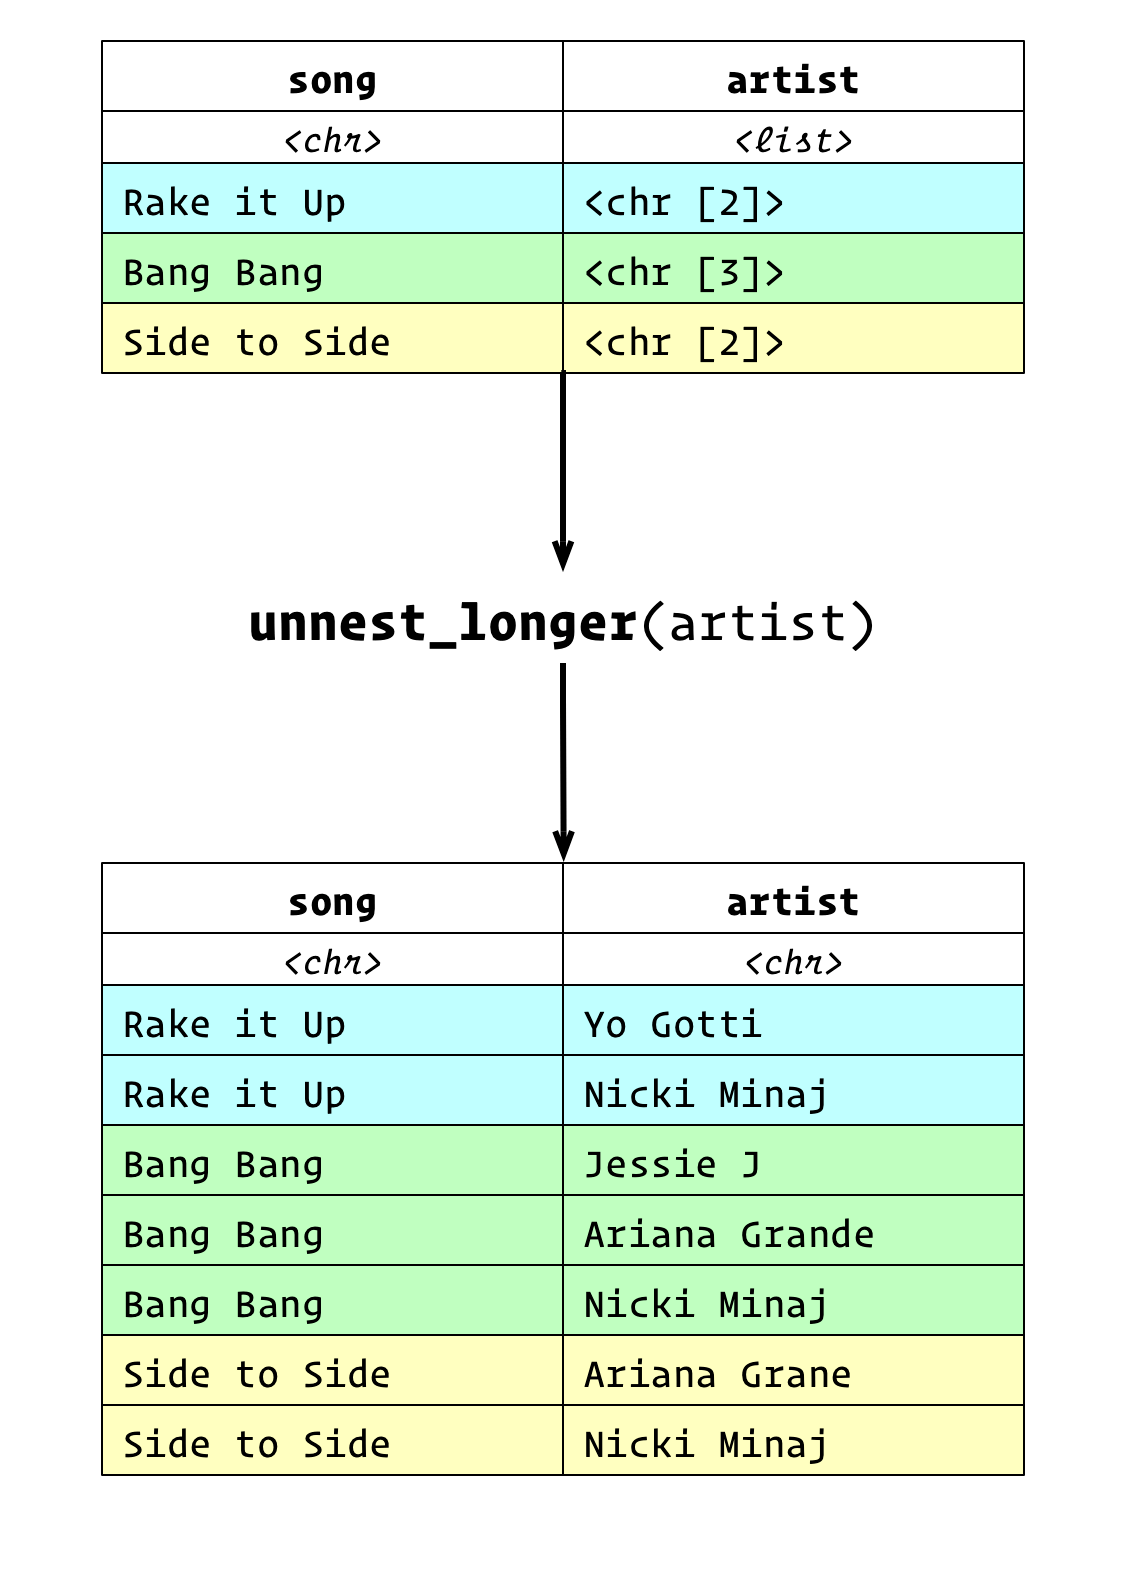 The nested data frame, with a song column, and a list column with artists is transformed into a data frame with one artist and song per row by using the unnest_longer() function.